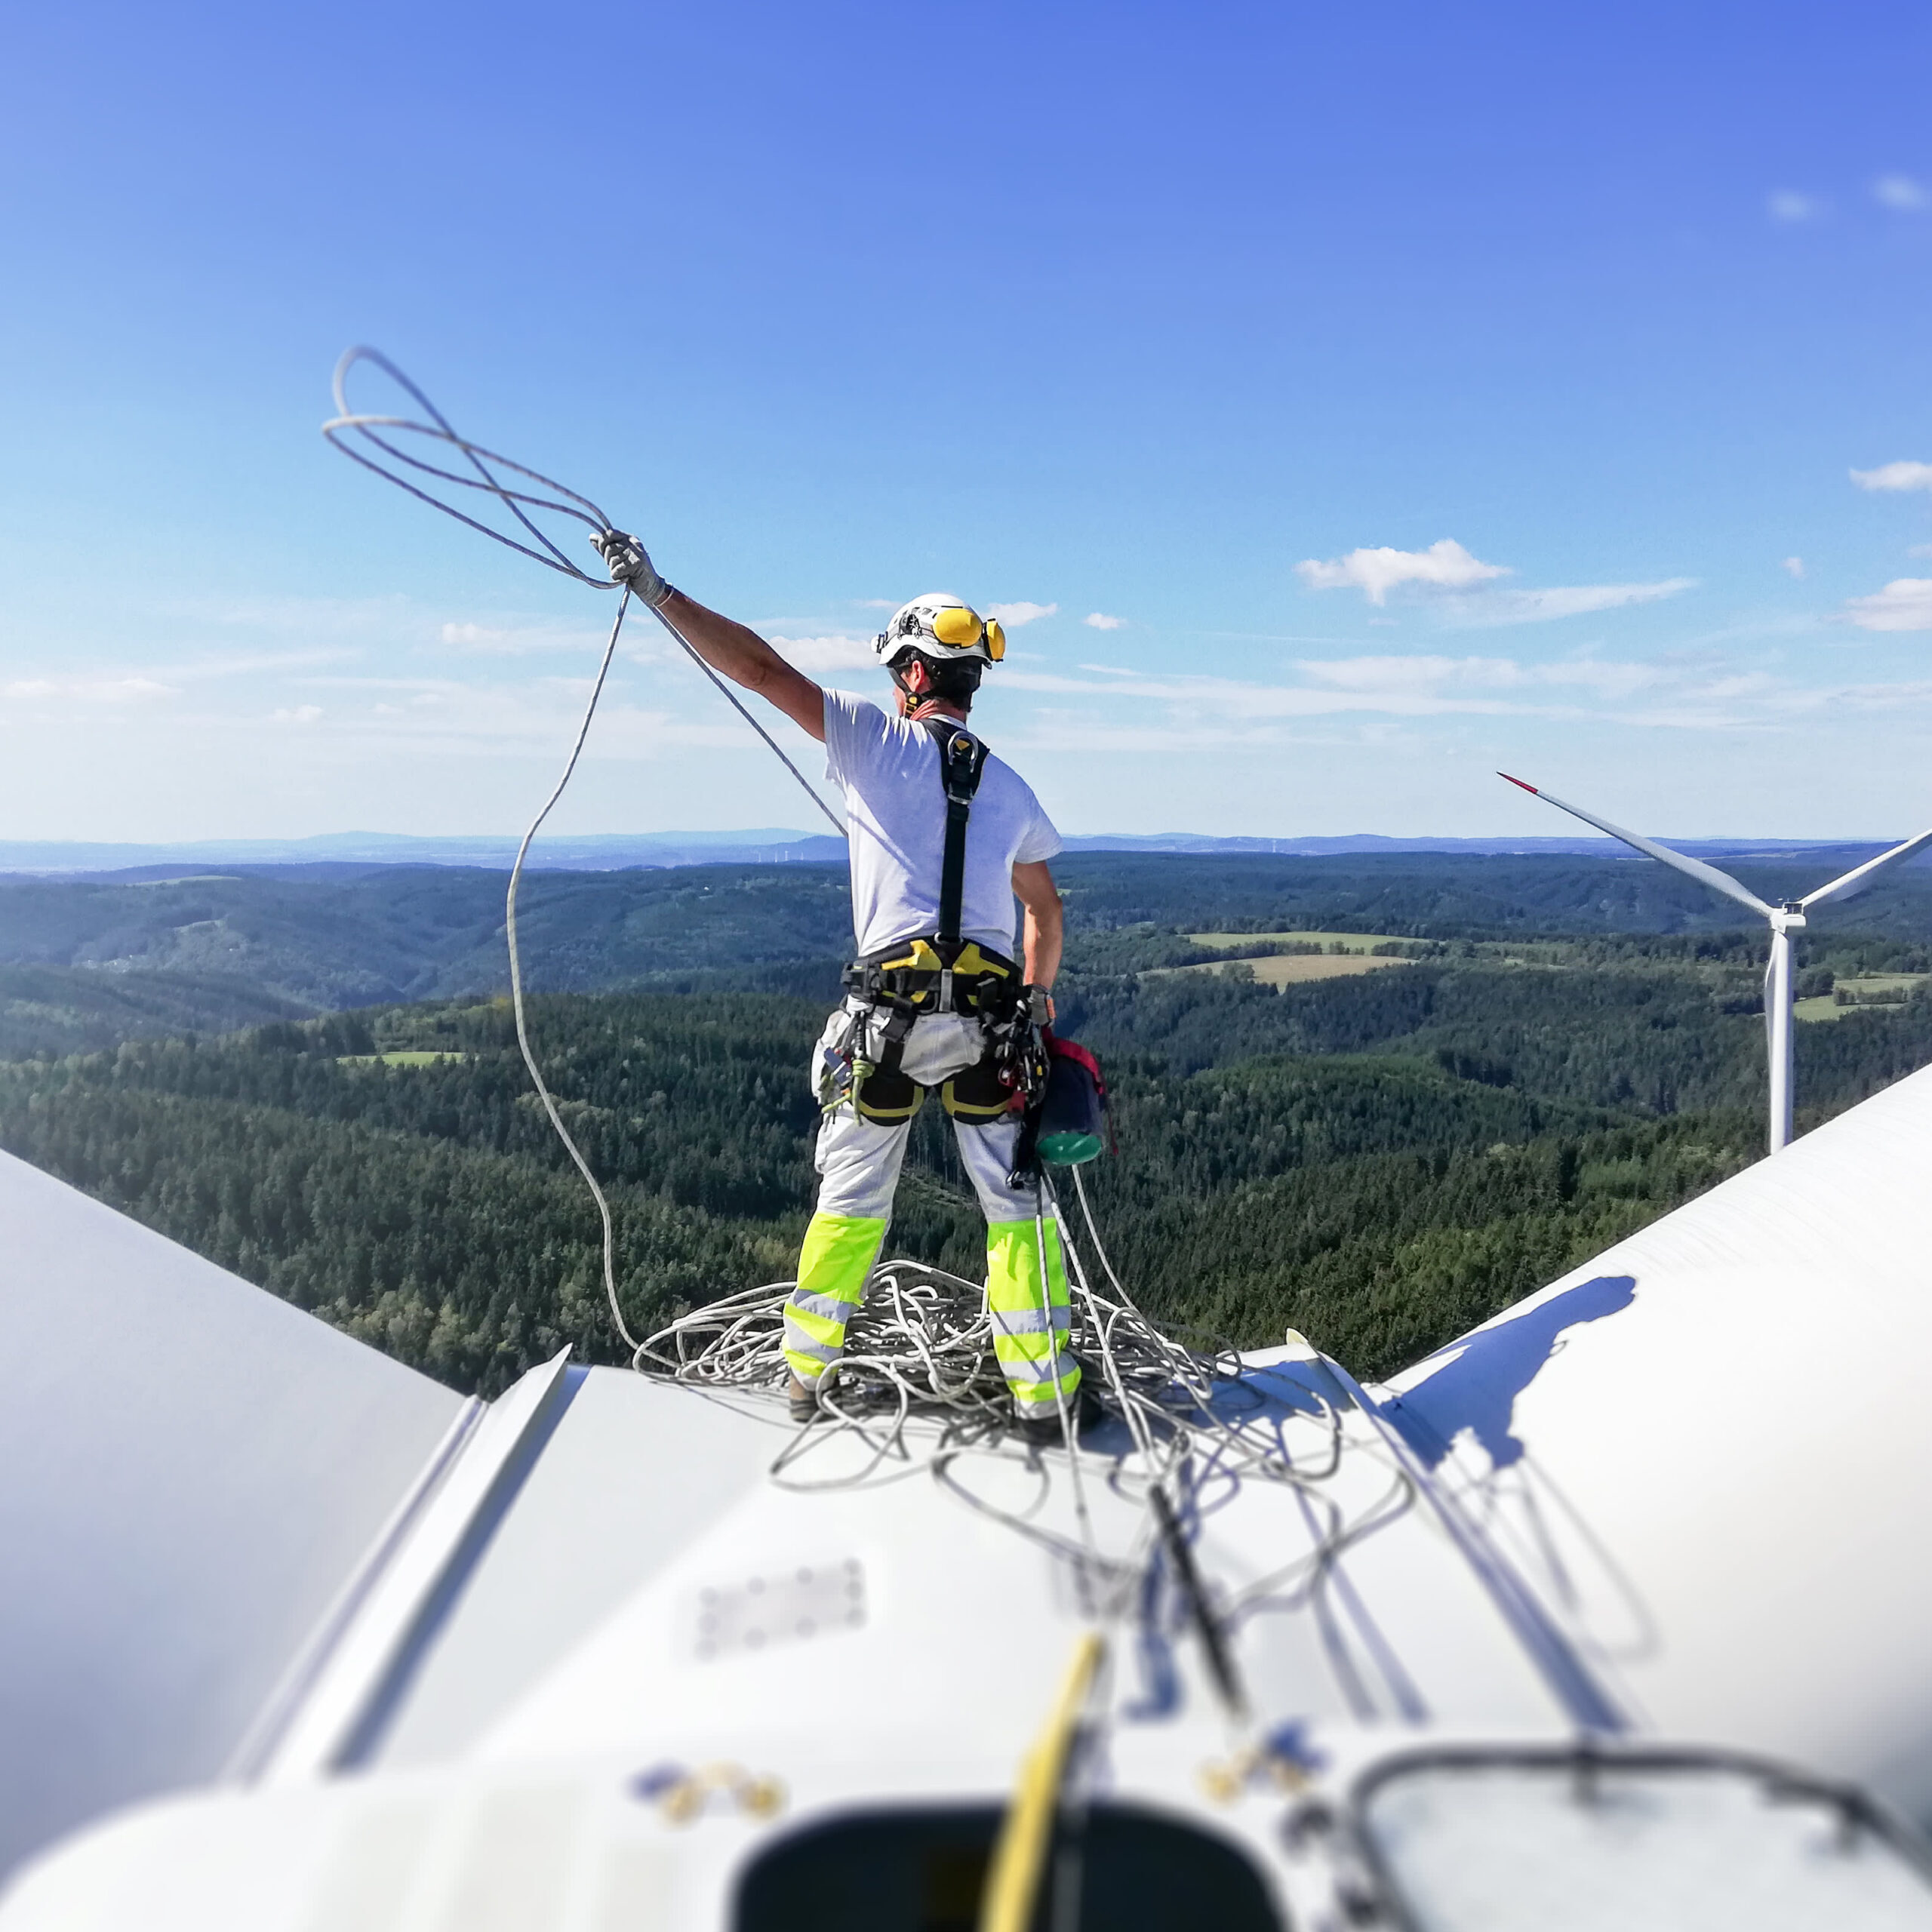 The fastest growing occupation in past decade: Wind Turbine Technician